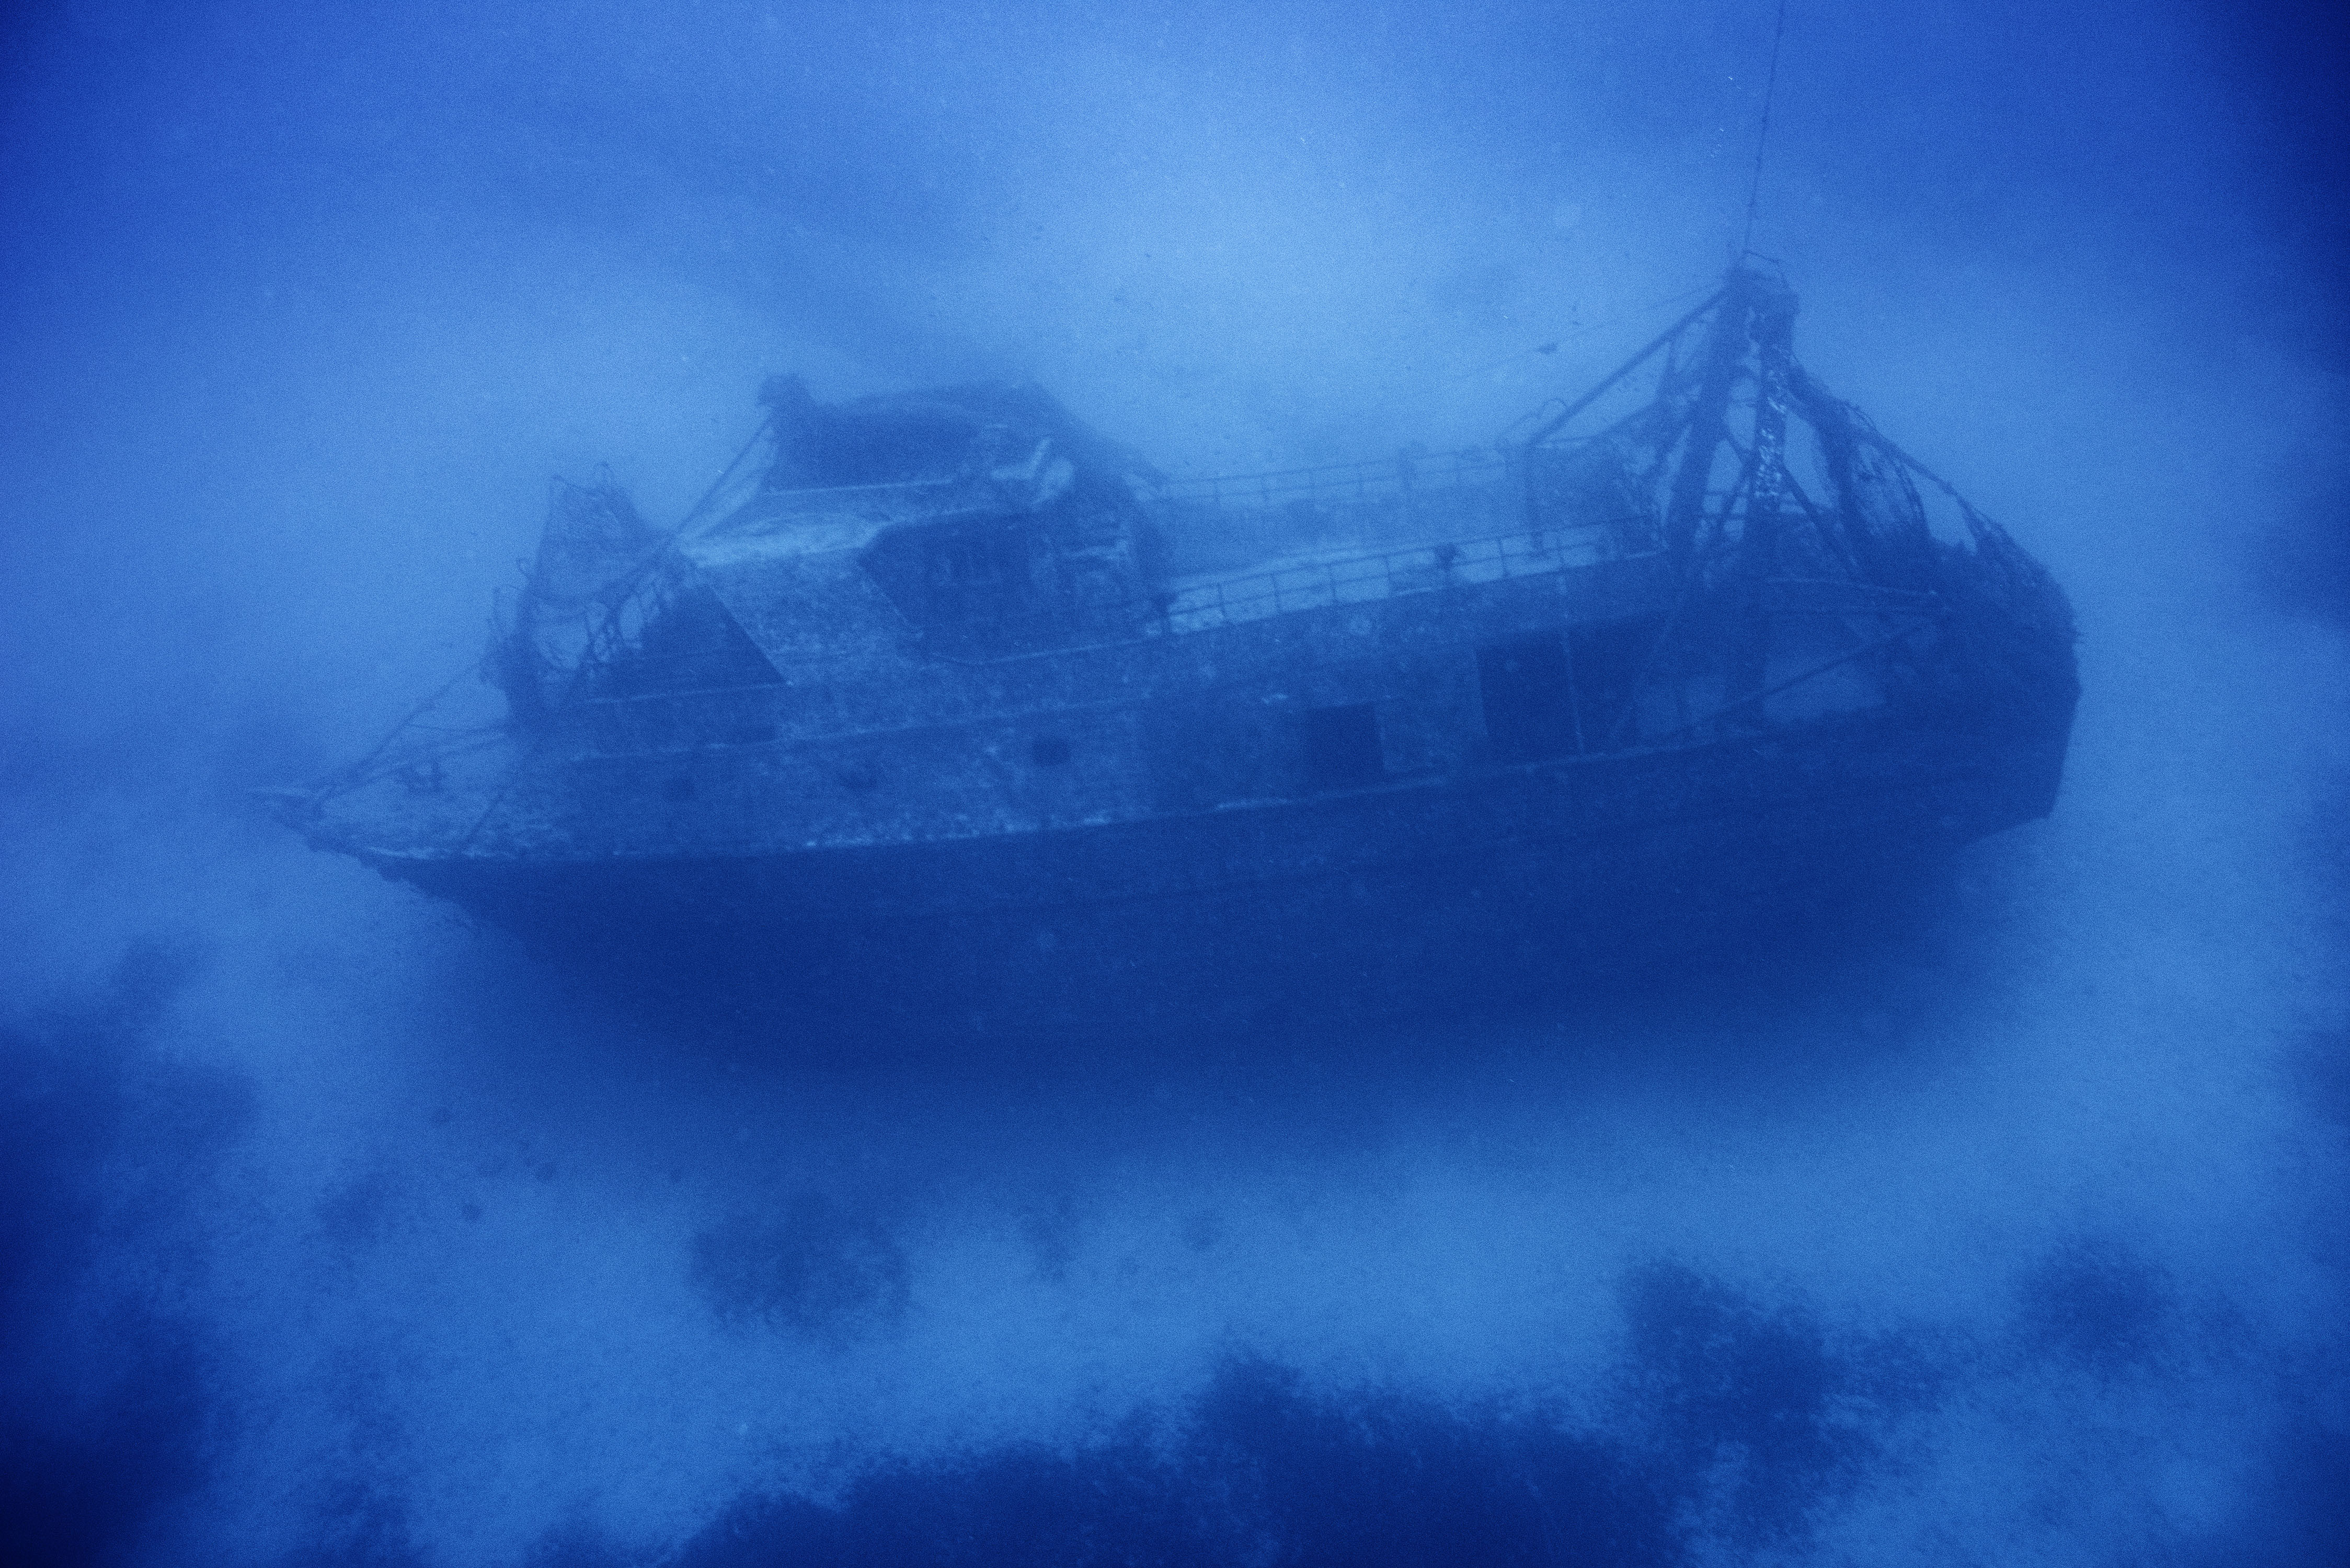 The shipwreck of the 66-foot-long fishing boat that sank off the coast of the Italian island of Lampedusa lies at a depth of 164 ft. on the seabed, on Sept. 22, 2014. The tragedy that happened a year ago on Oct. 3, 2013 killed 366 migrants from North Africa.